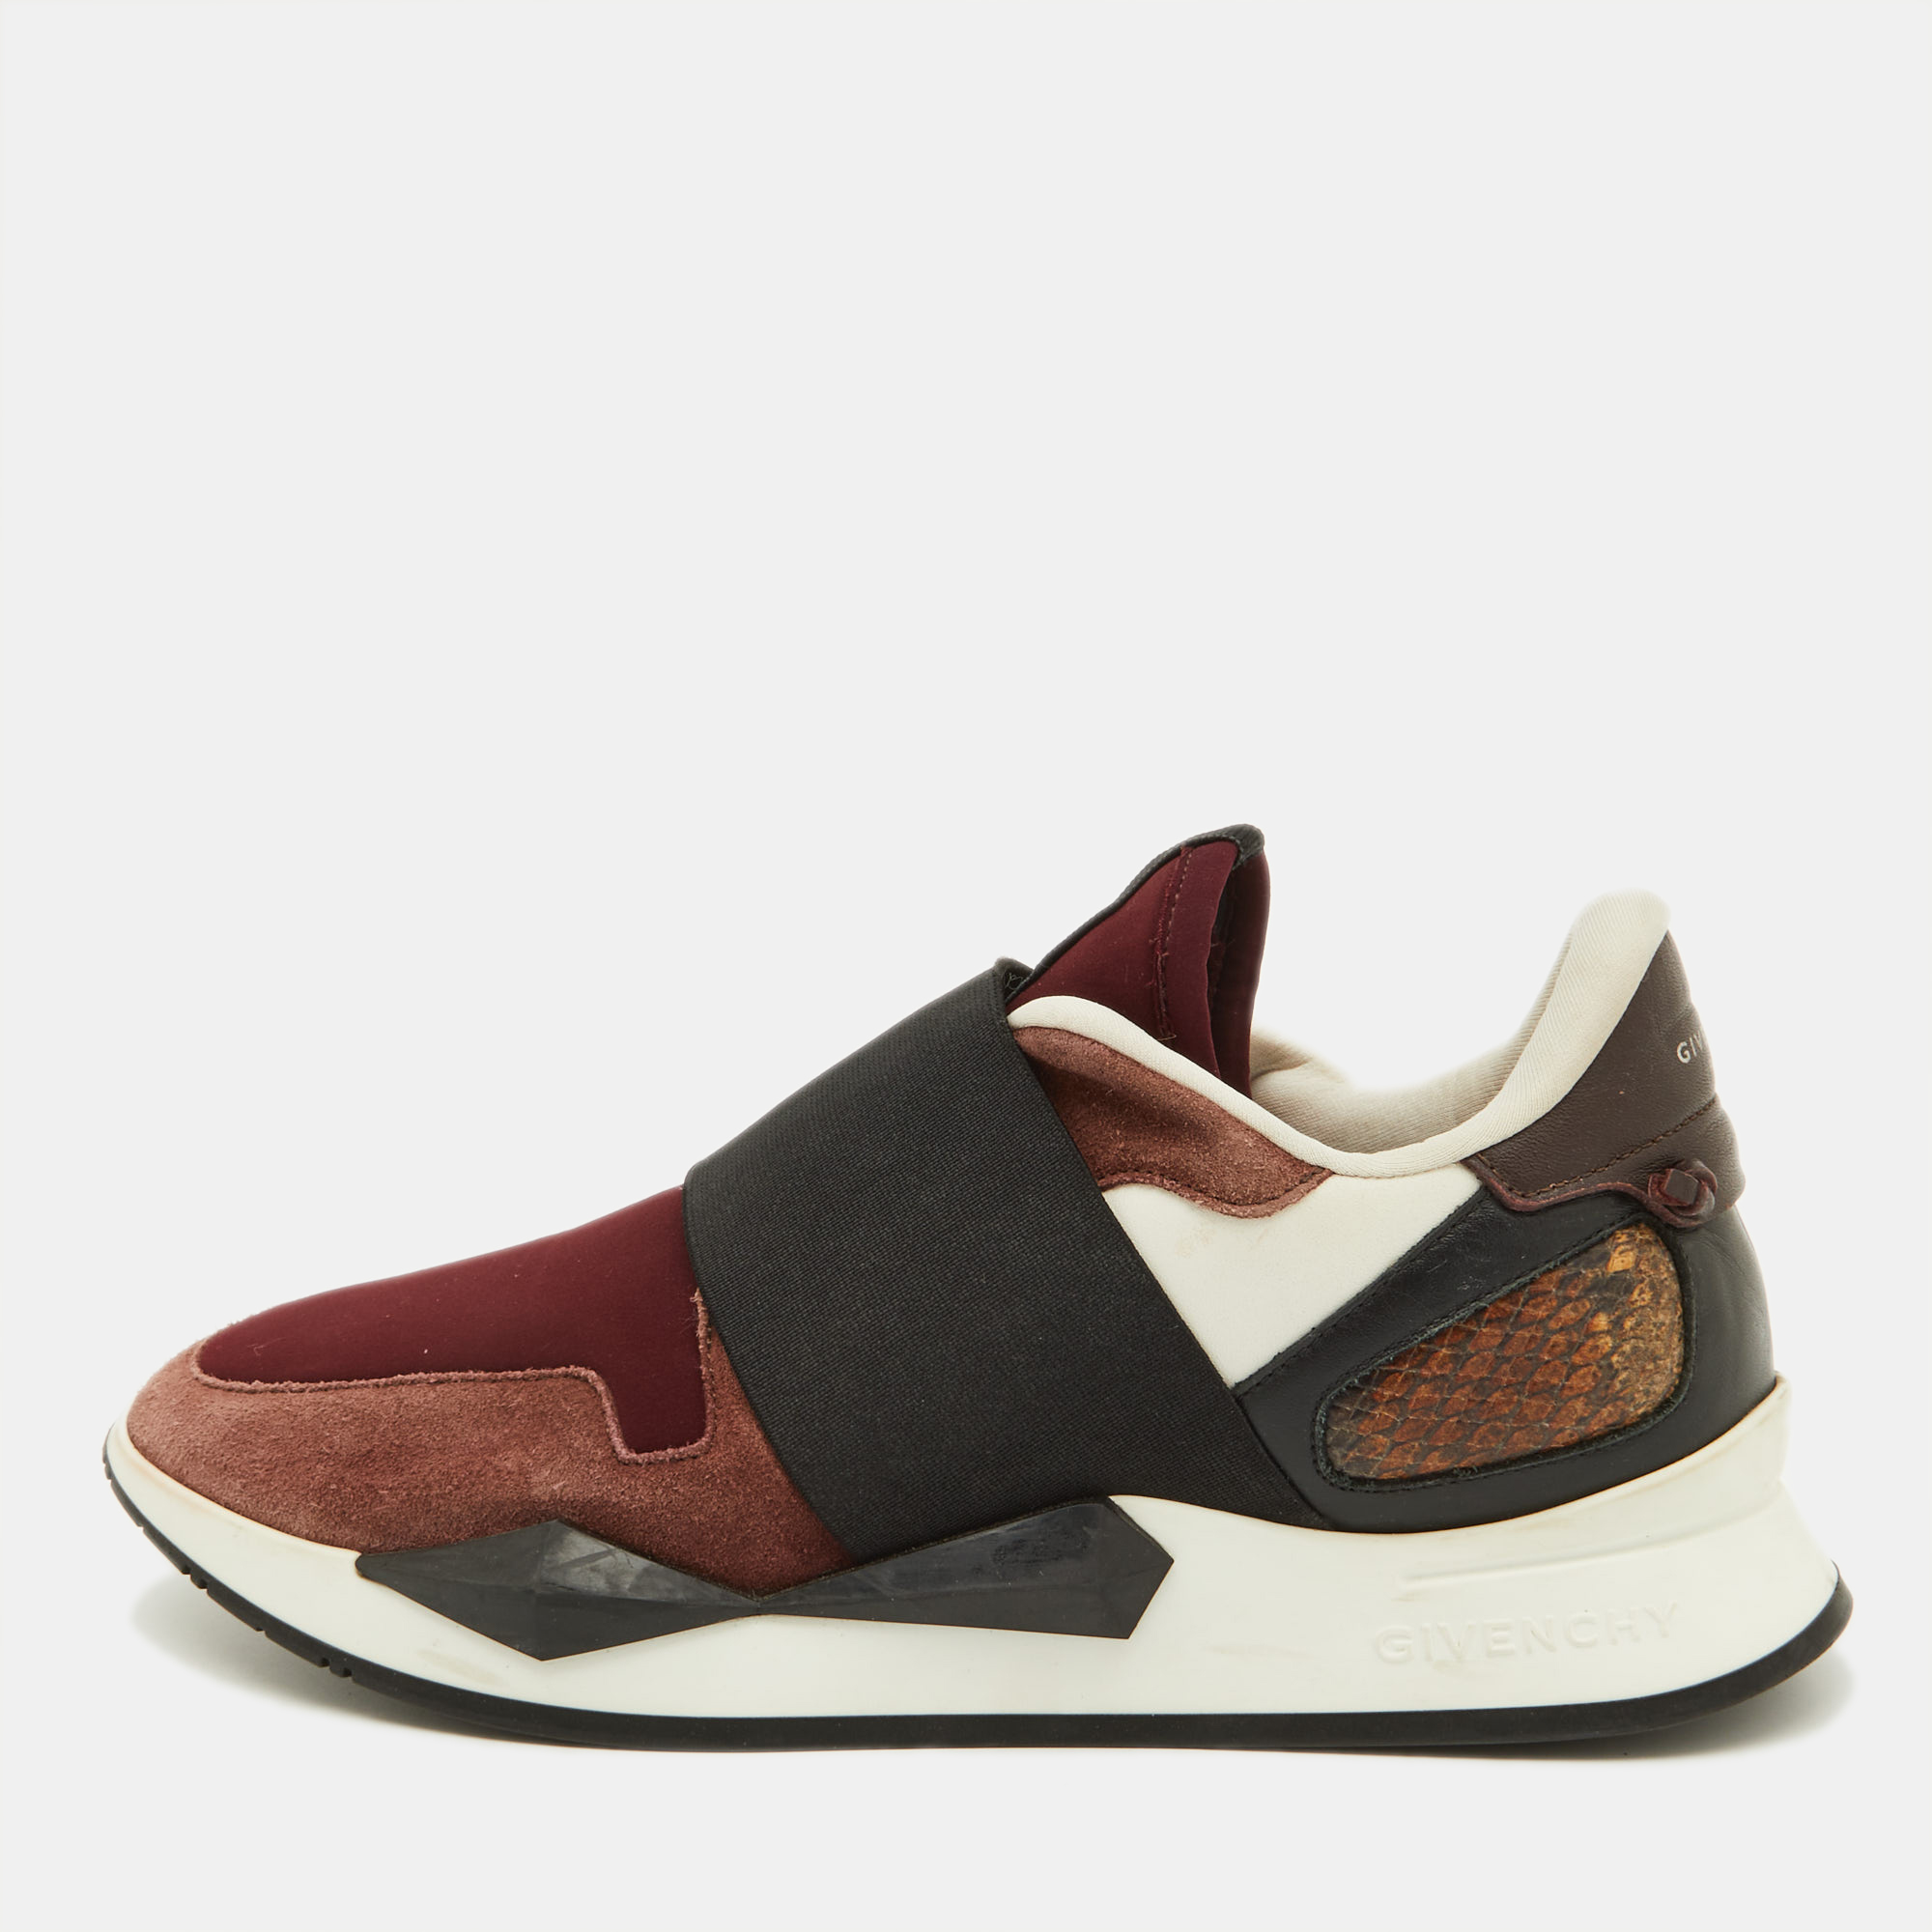 

Givenchy Multicolor Suede,Leather and Fabric Elastic Strap Active Runner Low Top Sneakers Size